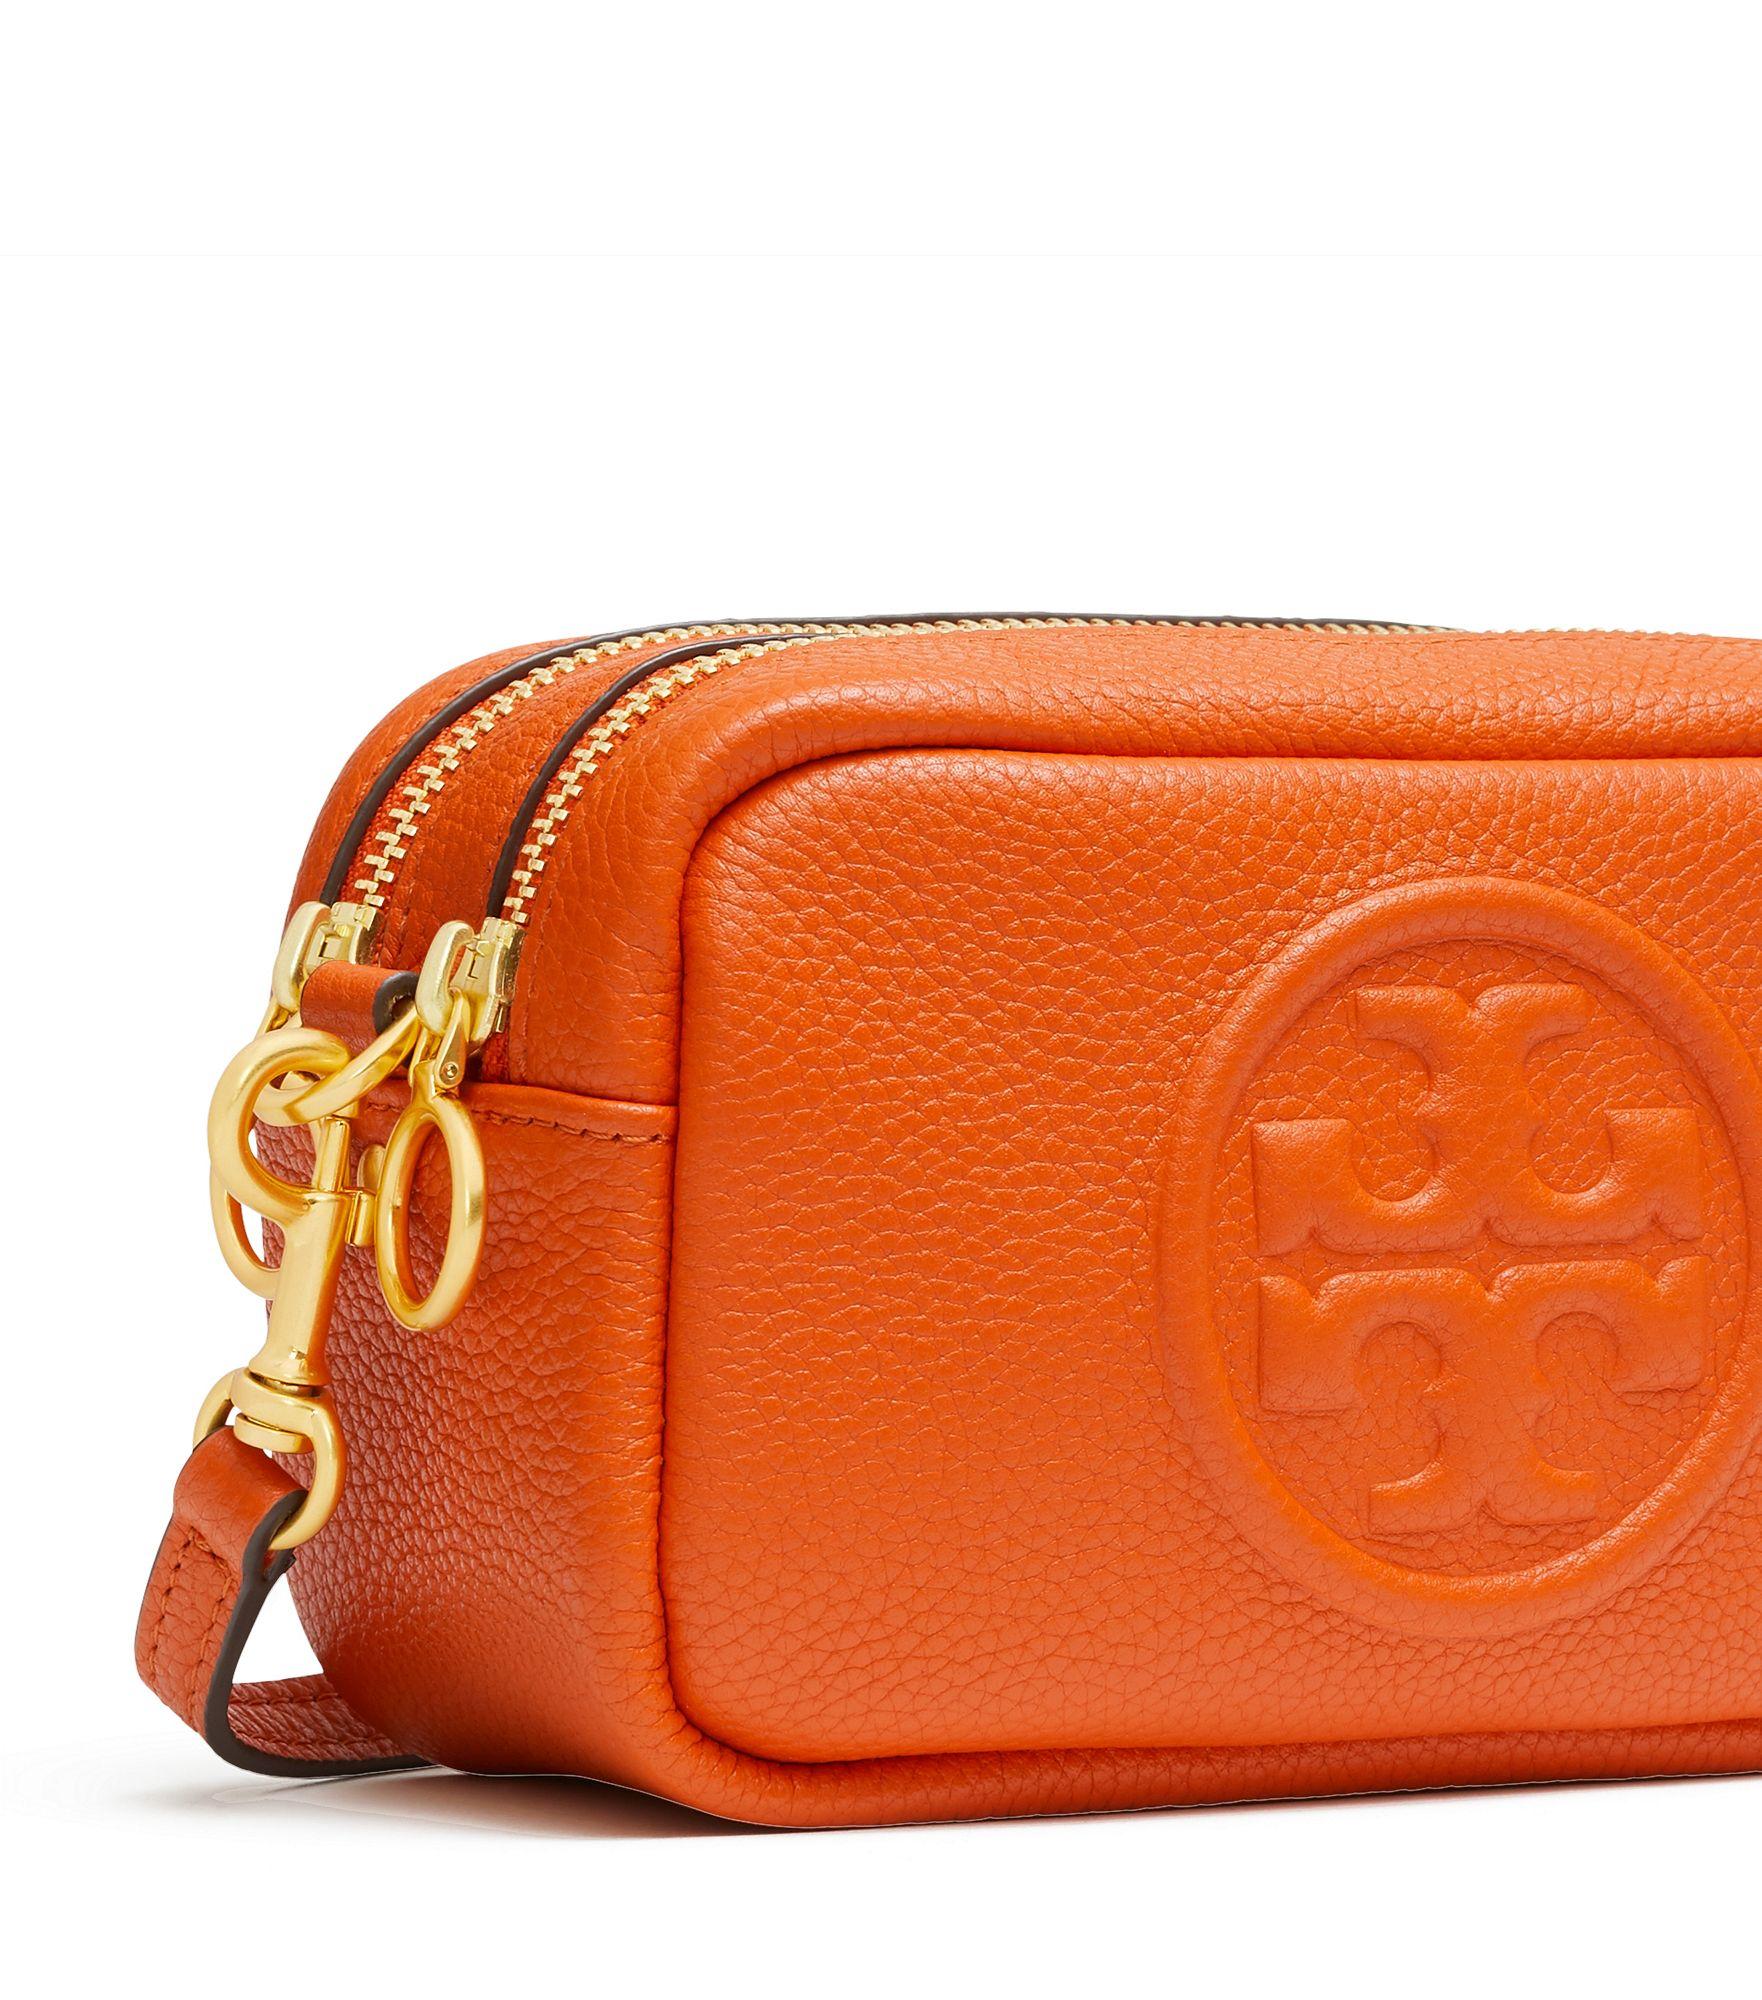 Tory Burch Perry Bombe Leather Crossbody Bag in Orange | Lyst